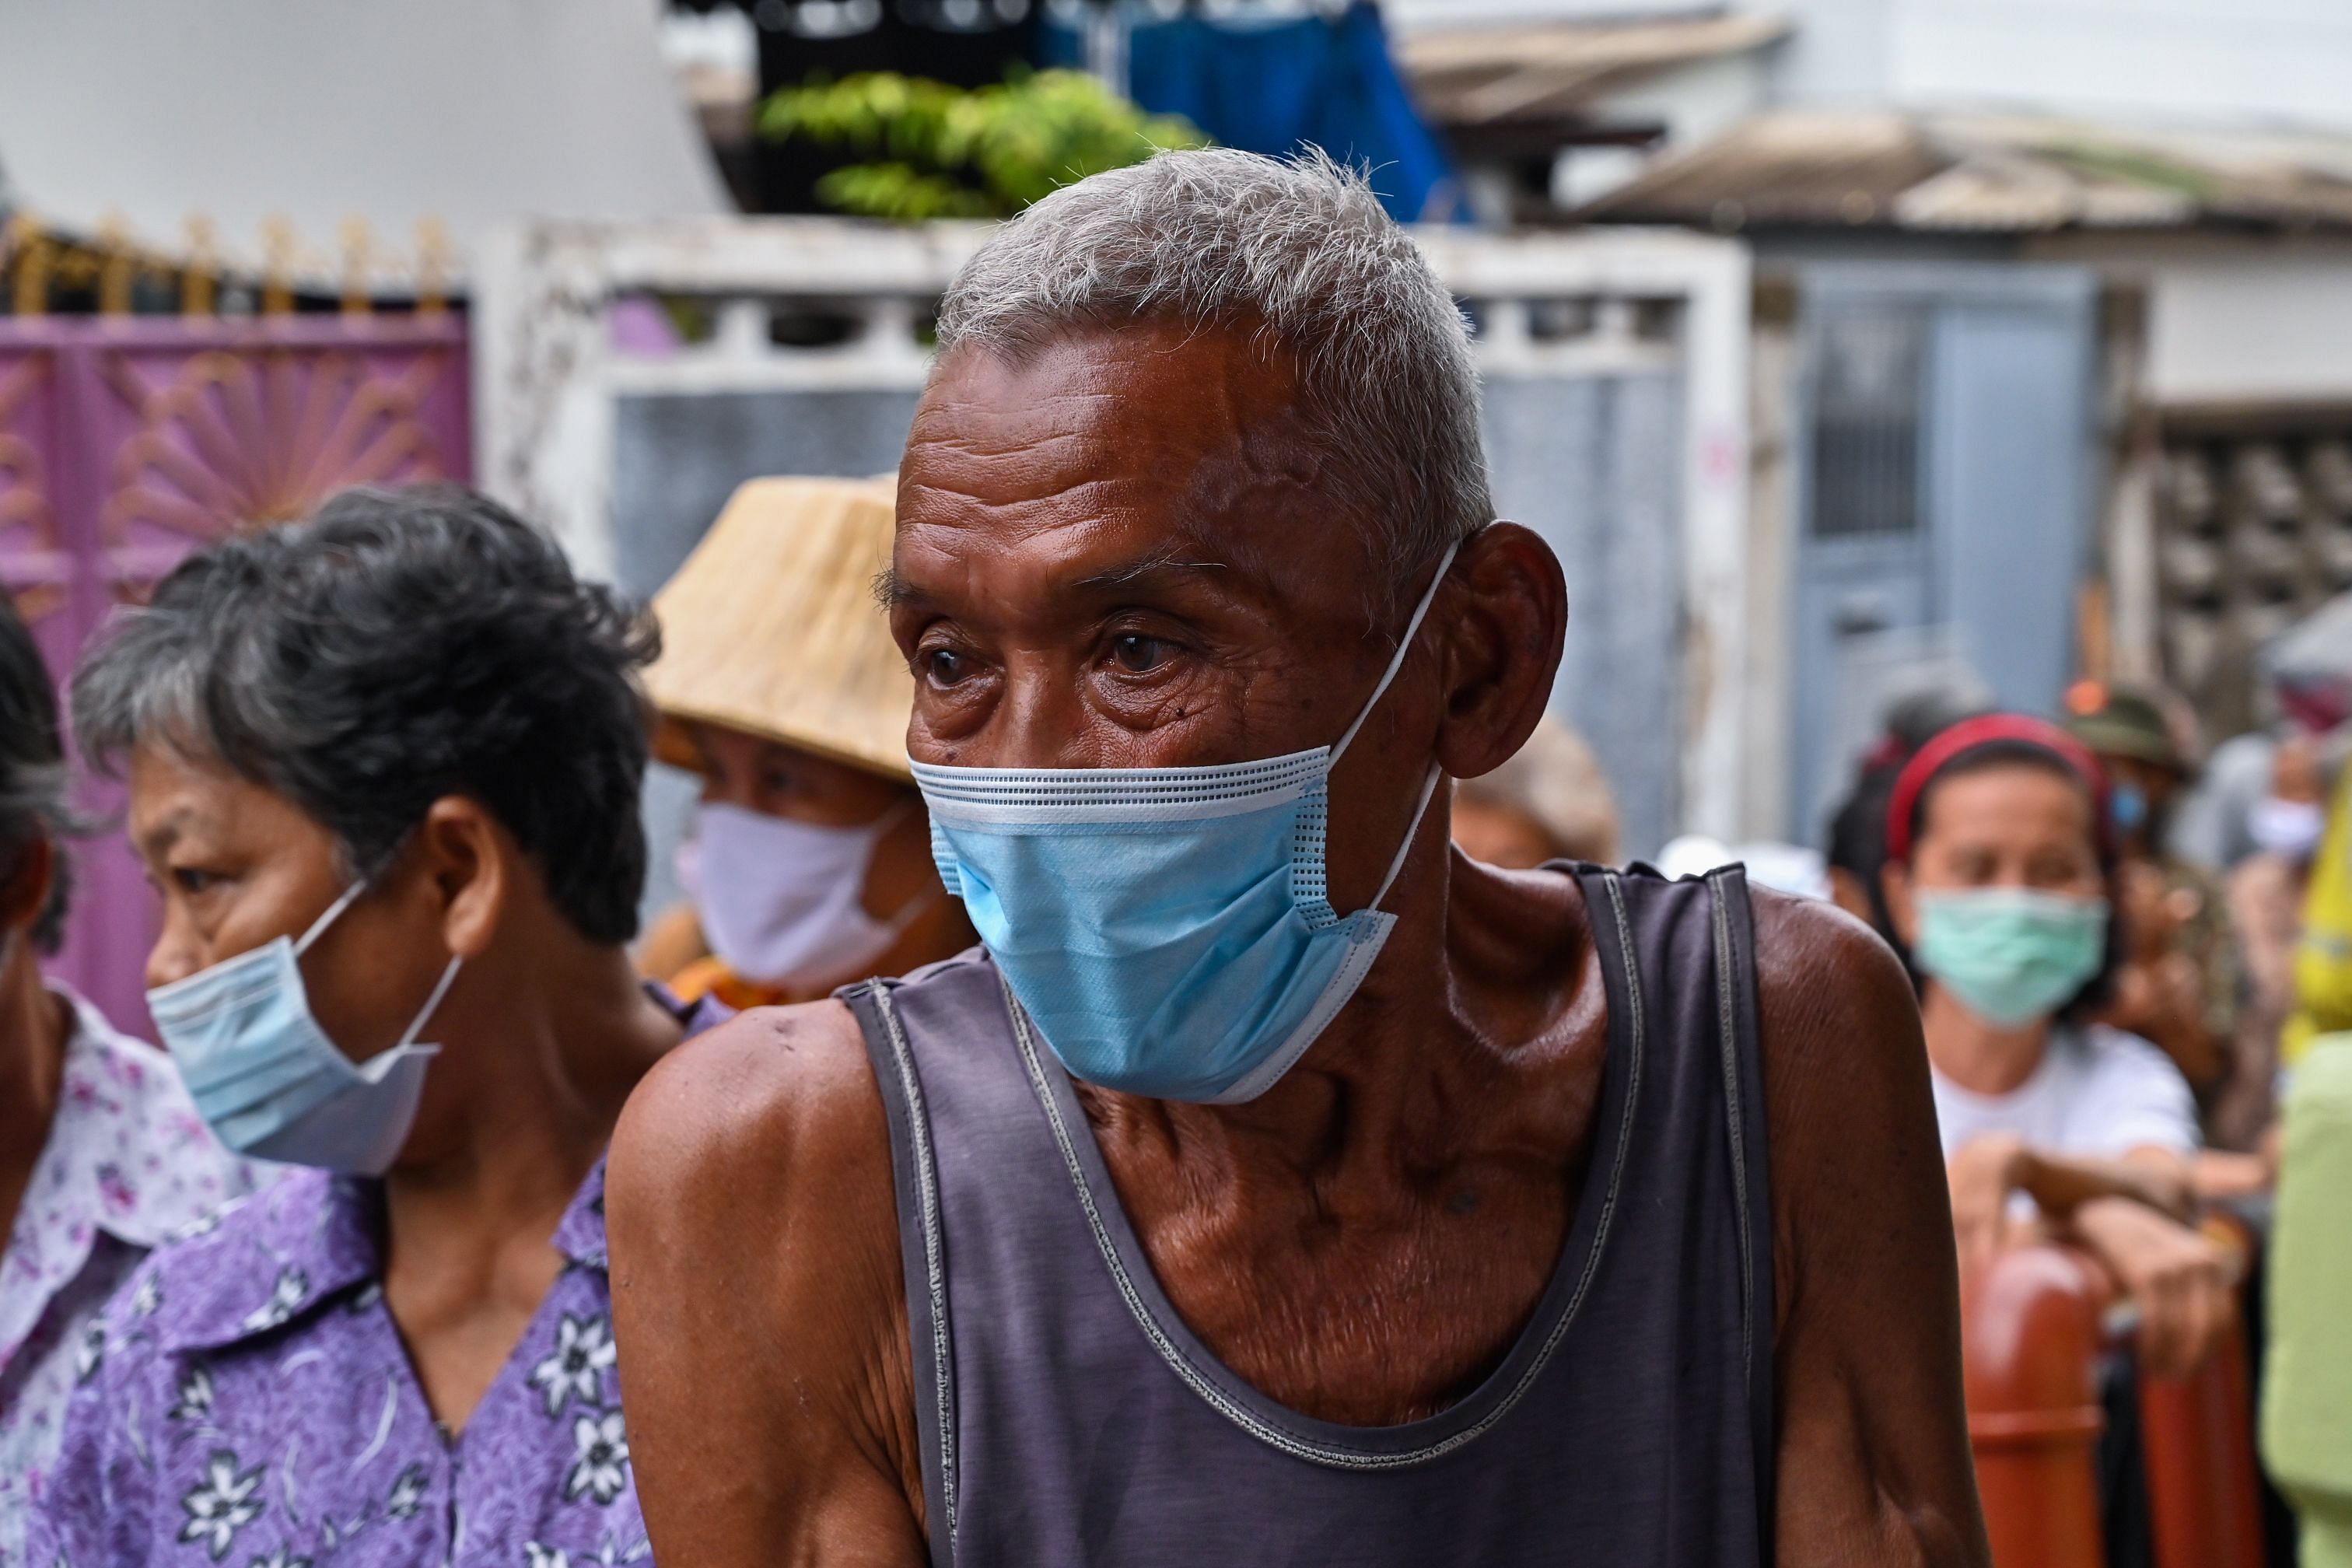 Elderly people line up for food and cash donations in a Bangkok district. (AFP)